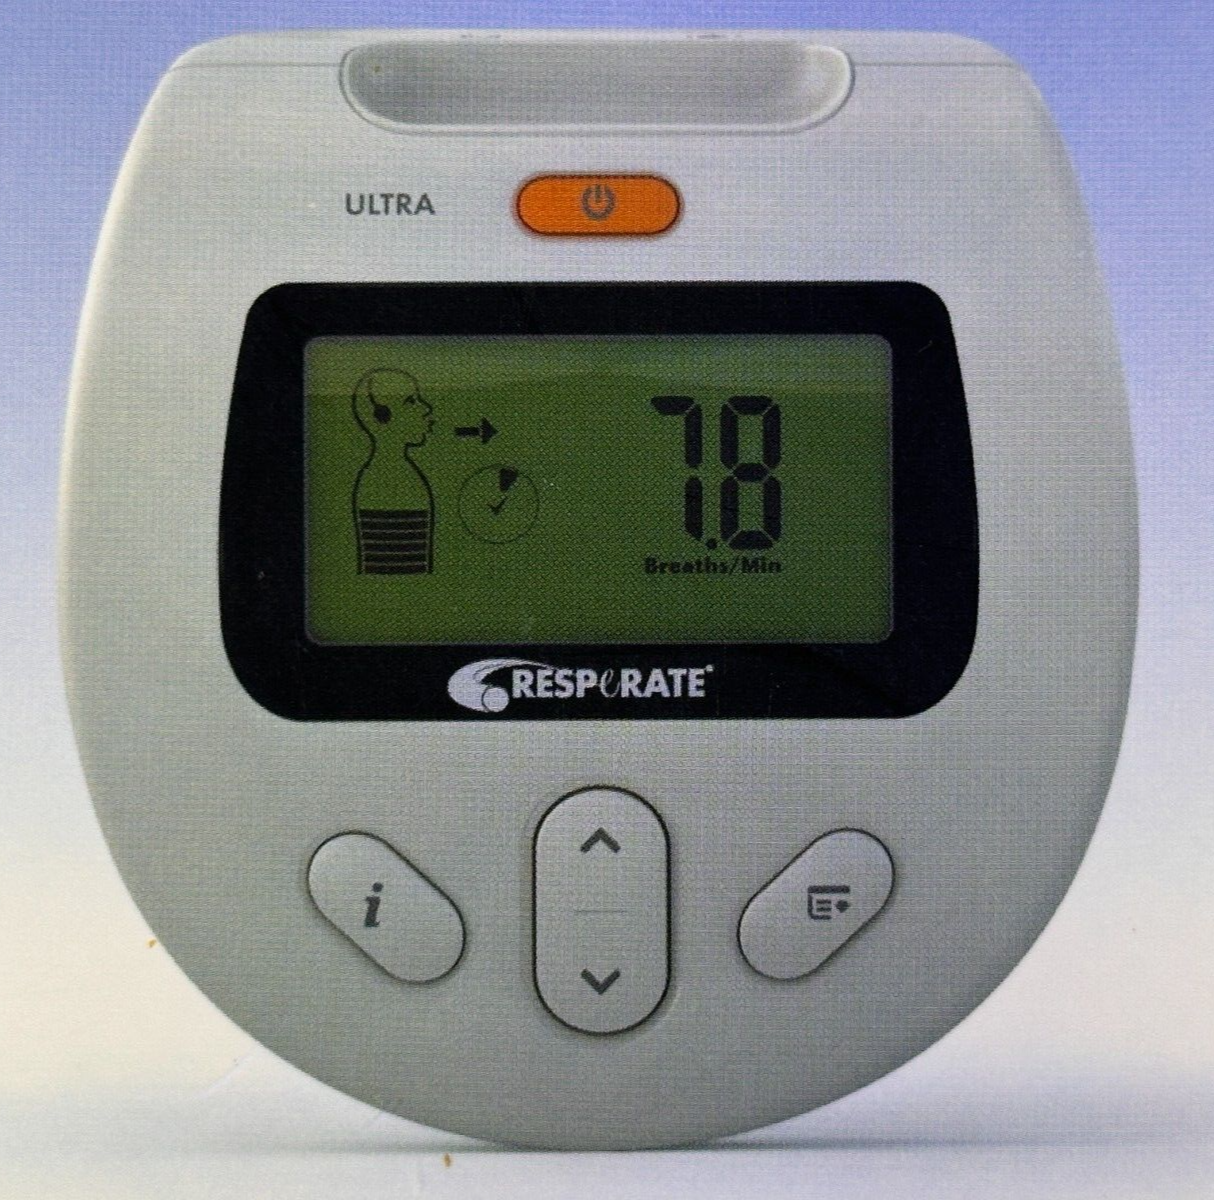 RESPeRATE Blood Pressure Lowering Device Ultra 502A0207H for Sale